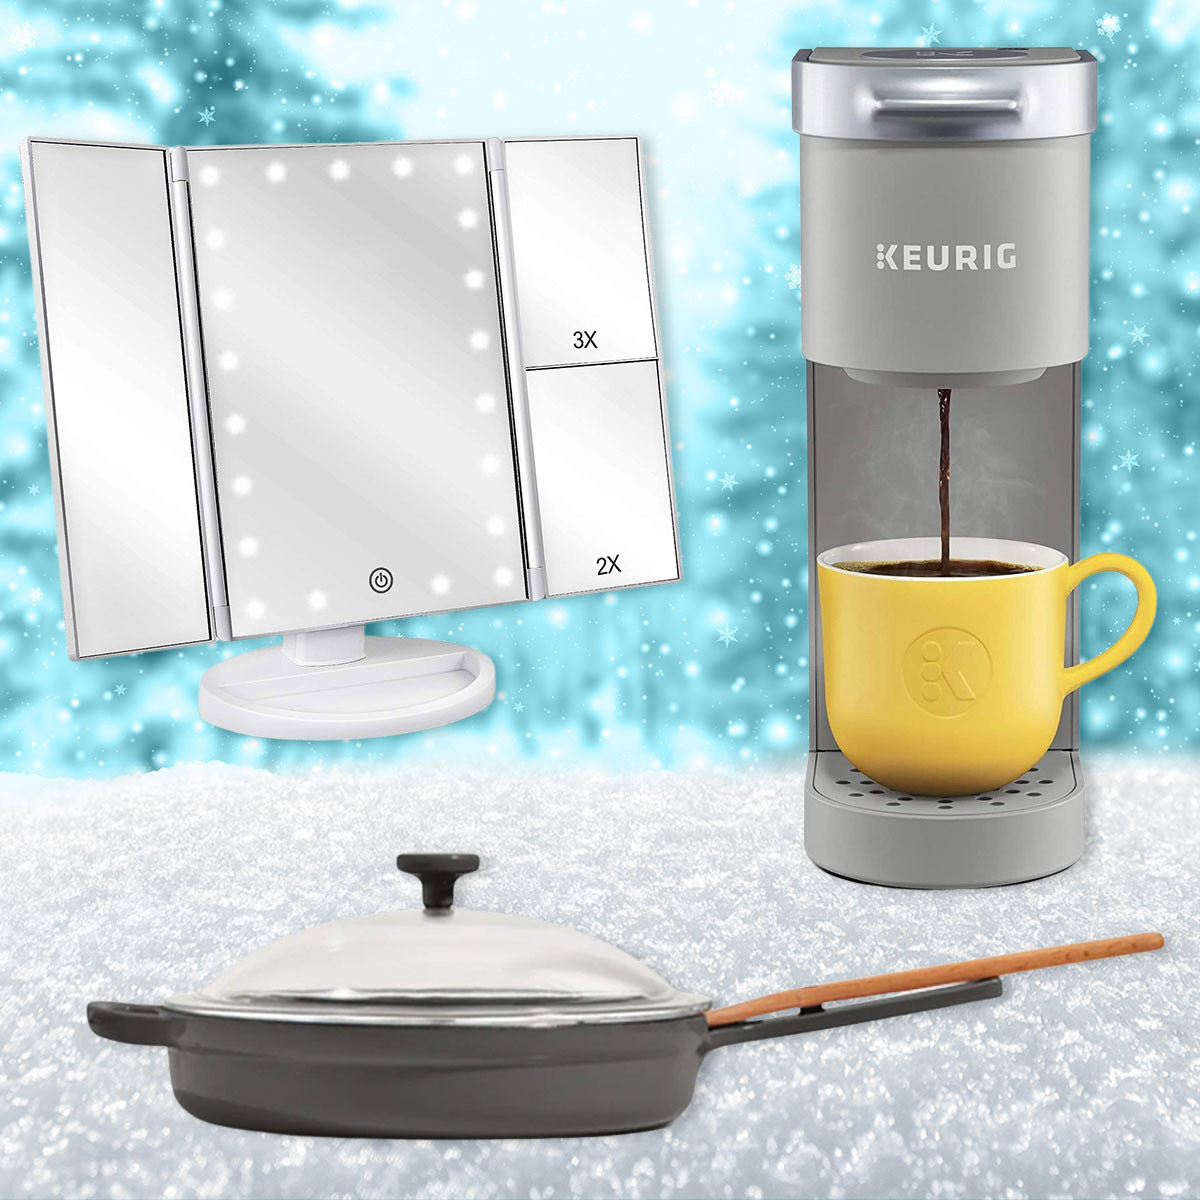 33 Genuinely Useful Gift Ideas That Are Both Practical And Life